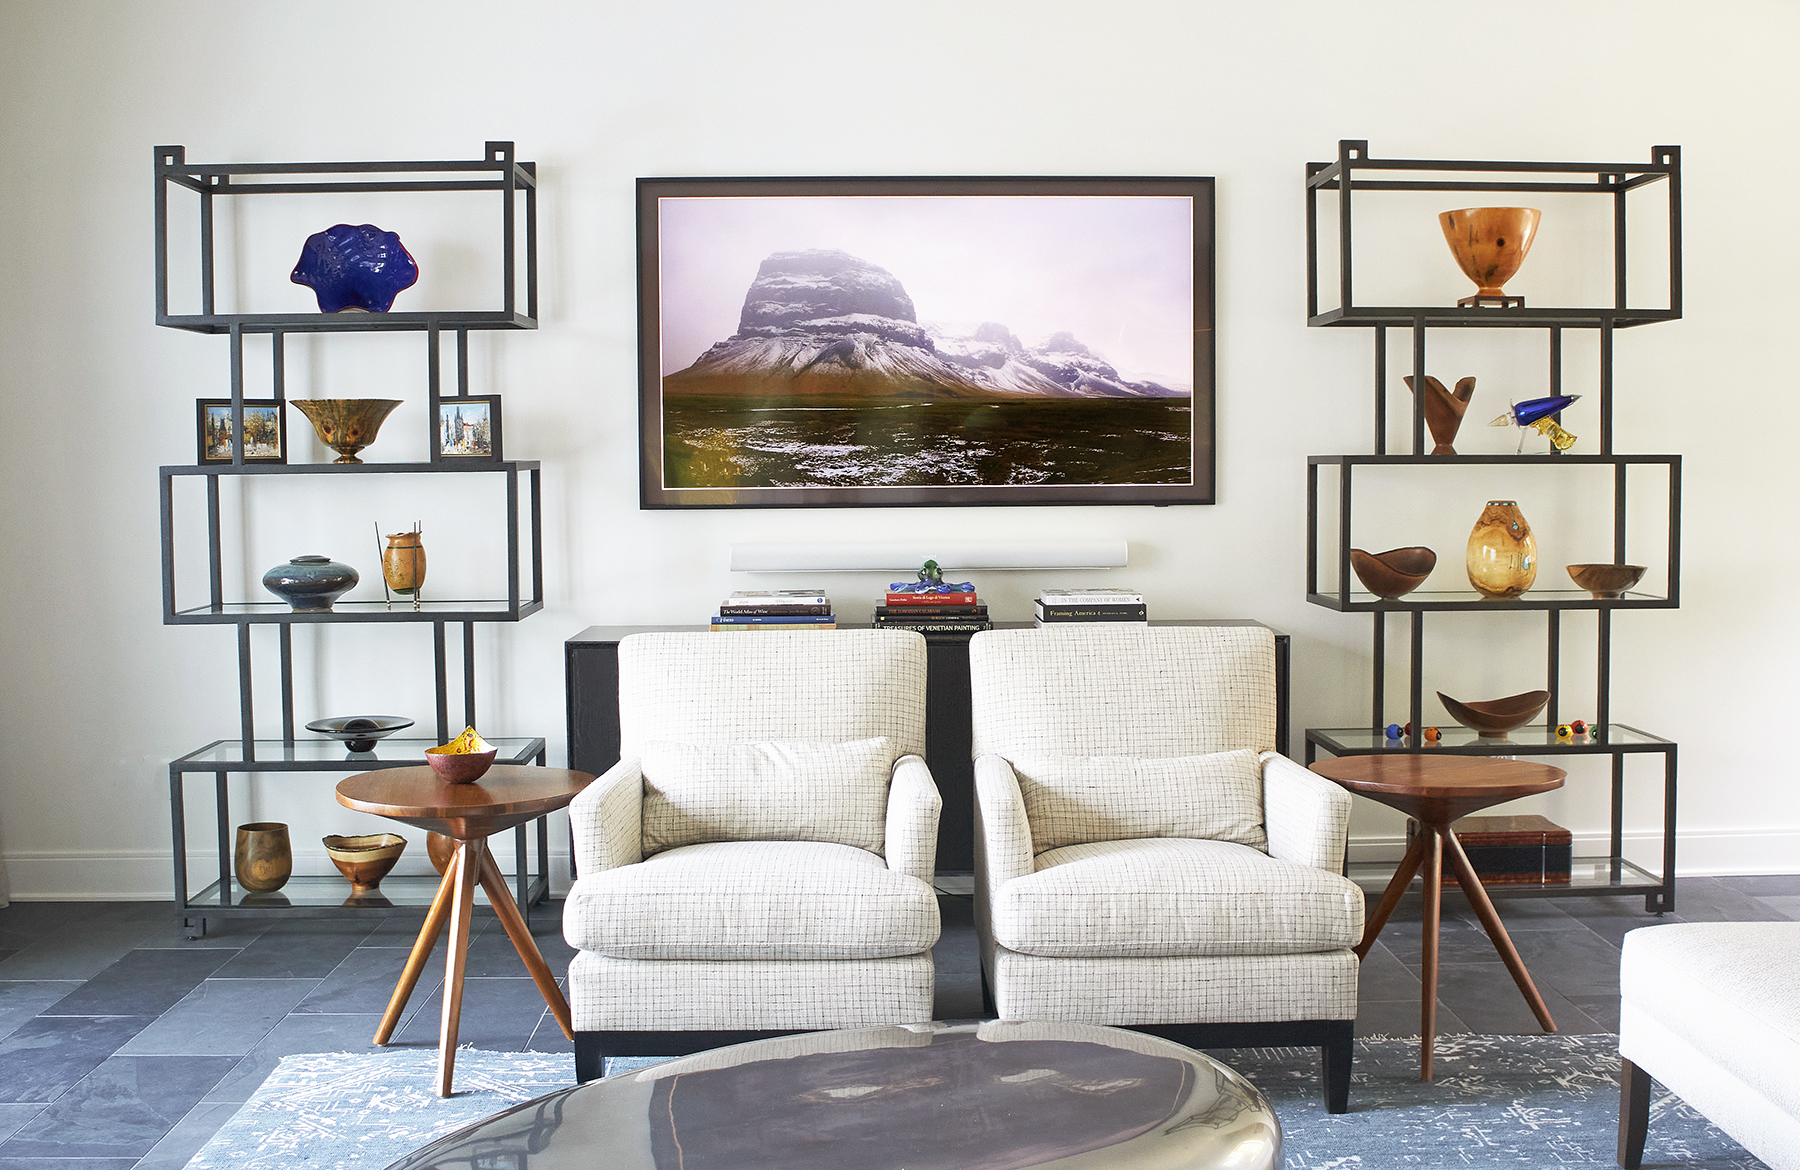 To one side of the living room sits two large shelves filled with pieces from the home owners art collection and separated by a large framed photograph.